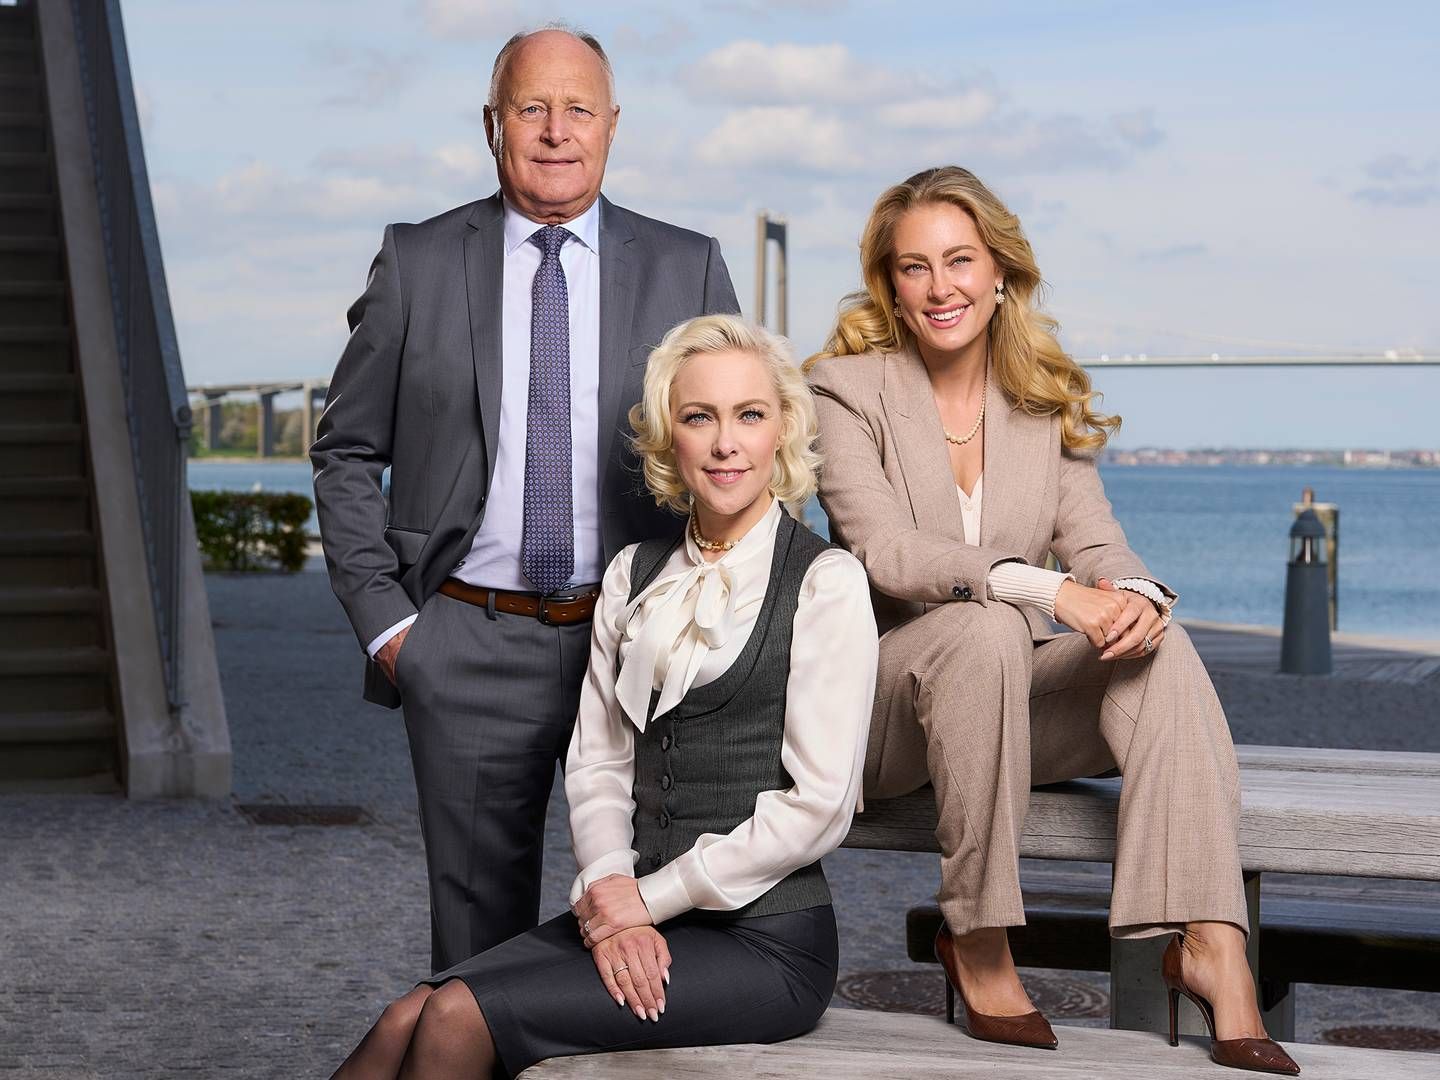 The owners of the USTC Group and the collapsed Nordic Waste, Torben Østergaard-Nielsen, Nina Østergaard Borris (center) and Mia Østergaard Rechnitzer, deliver yet another financial report with high earnings and can add to their personal fortune. | Photo: PR-foto USTC-koncernen